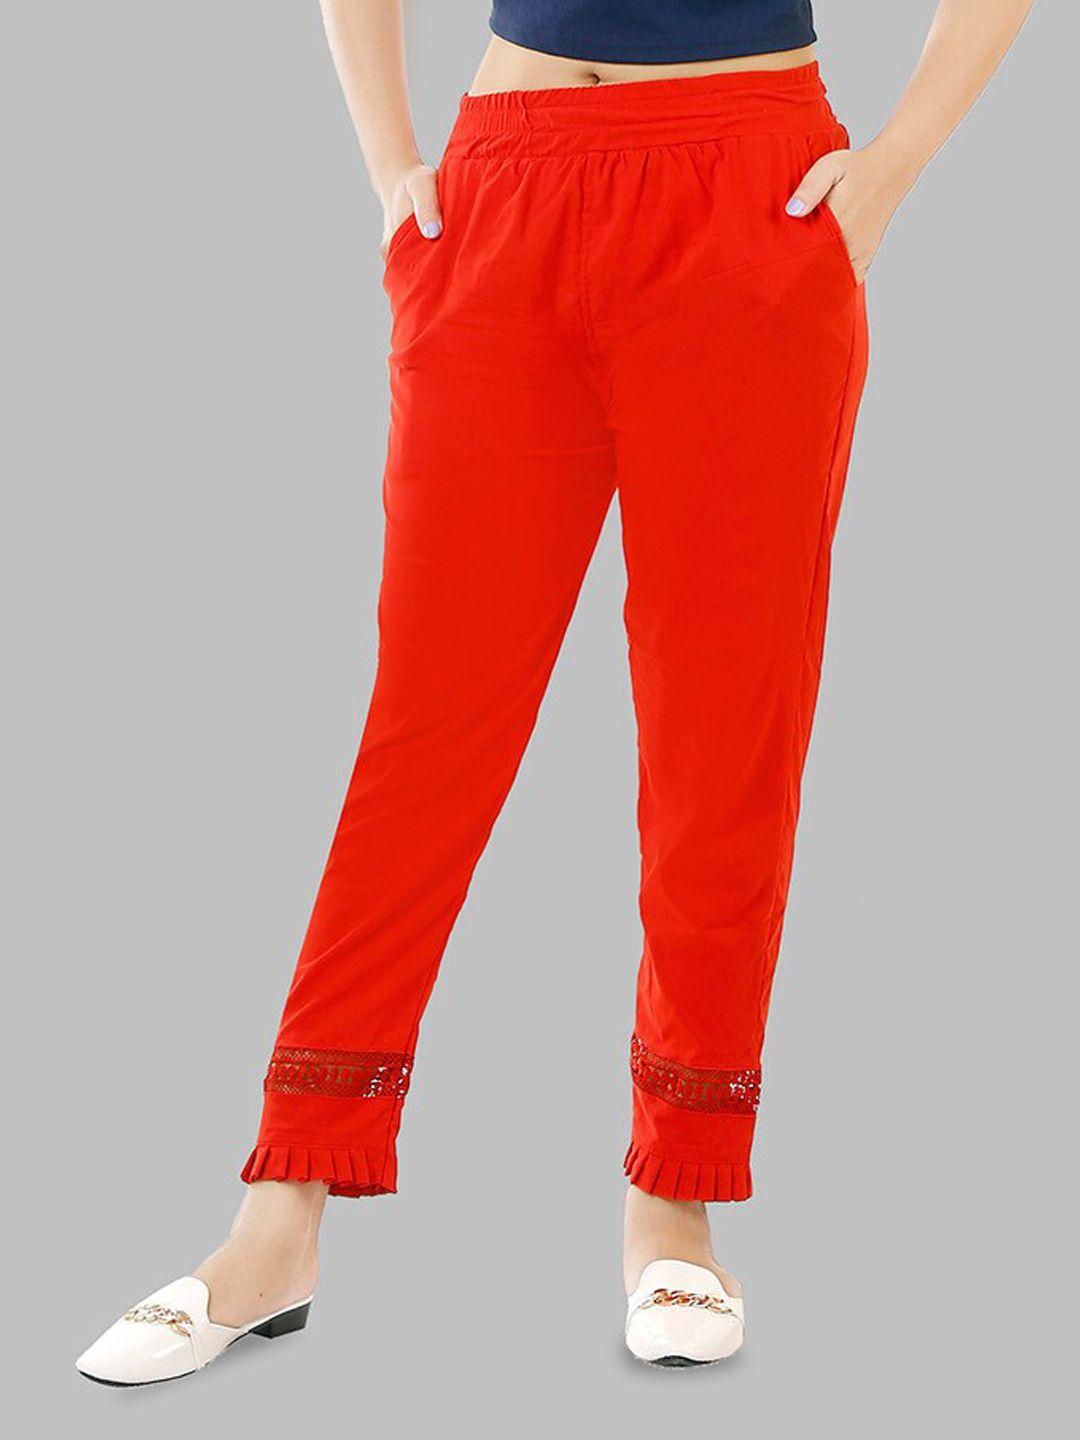 baesd women red pencil slim fit trousers